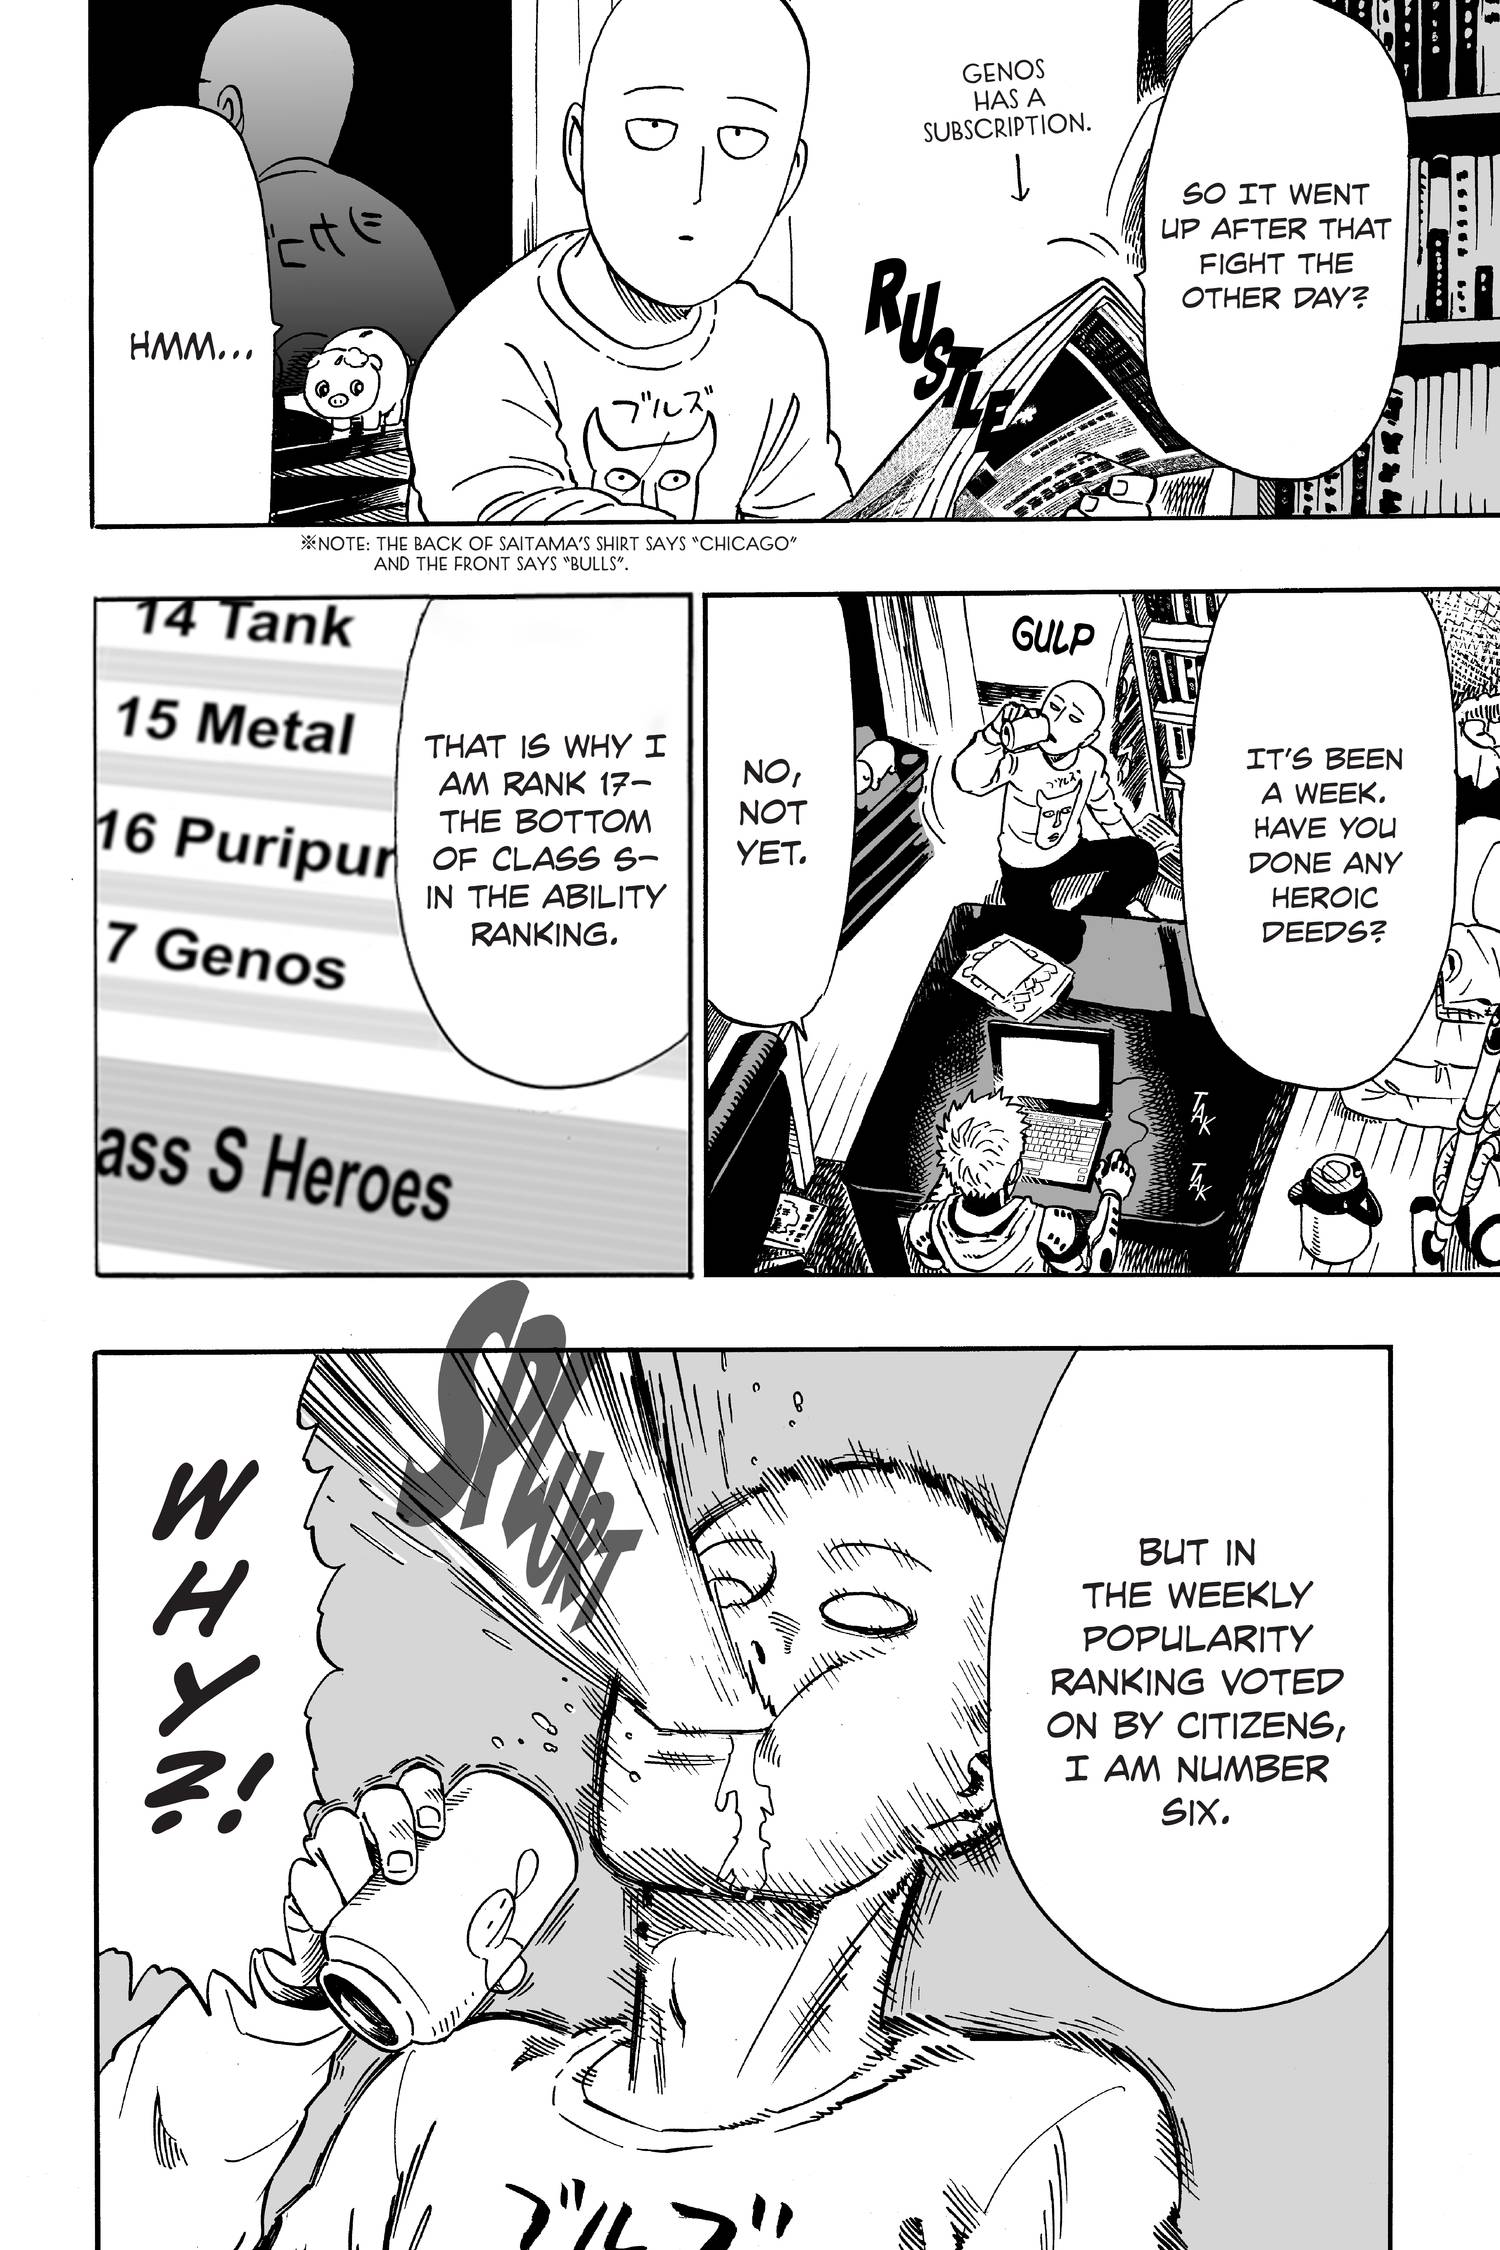 One-Punch Man, Vol. 4 (4) by ONE